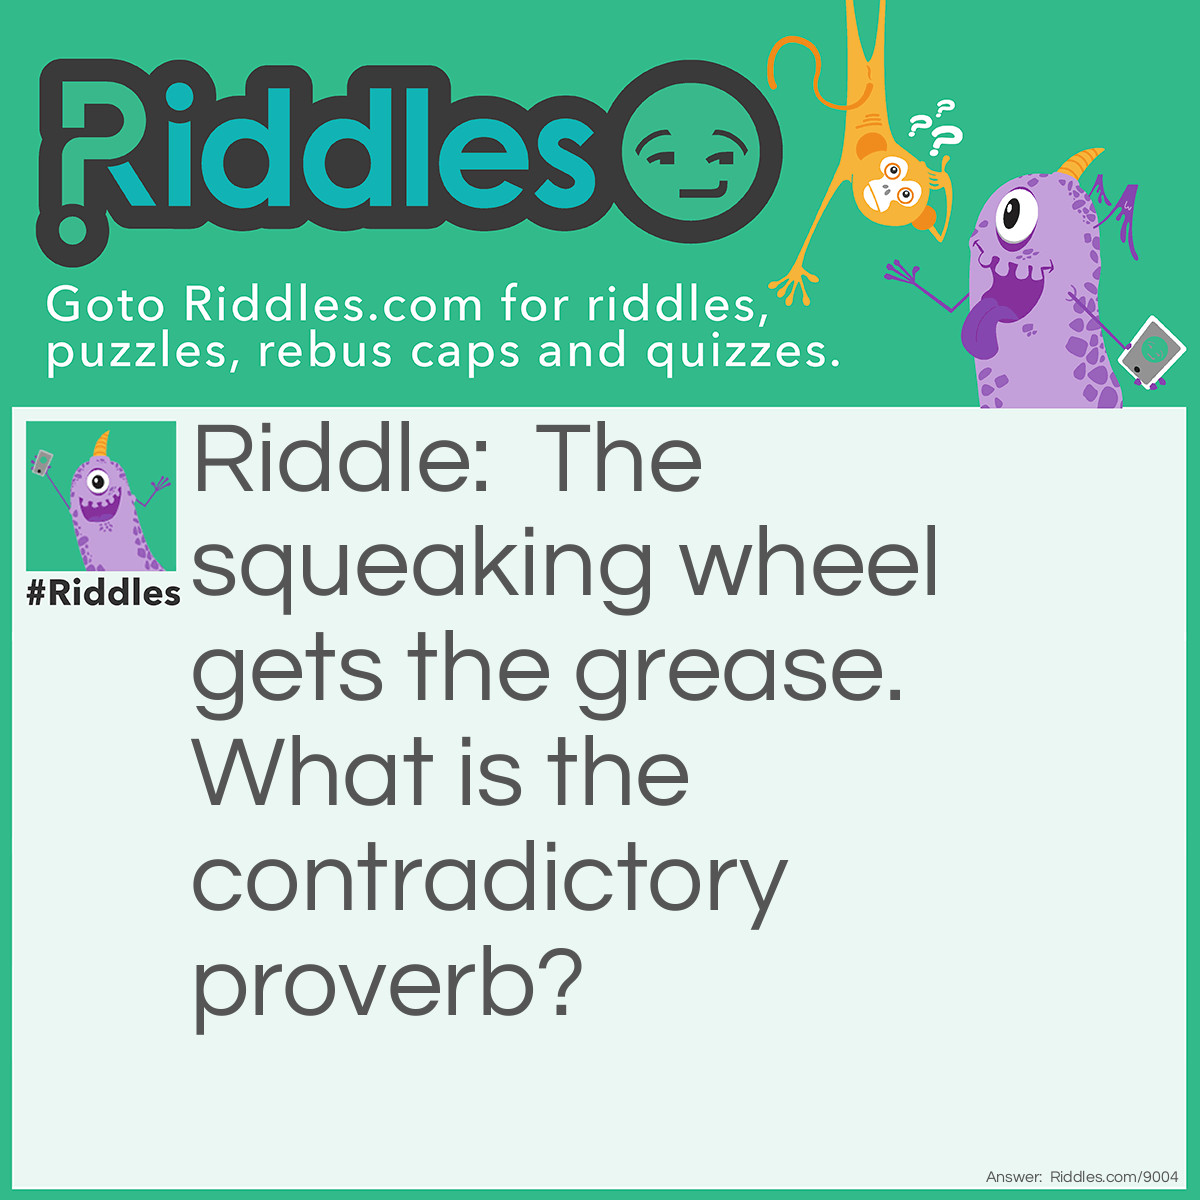 Riddle: The squeaking wheel gets the grease. What is the contradictory proverb? Answer: Silence is golden.